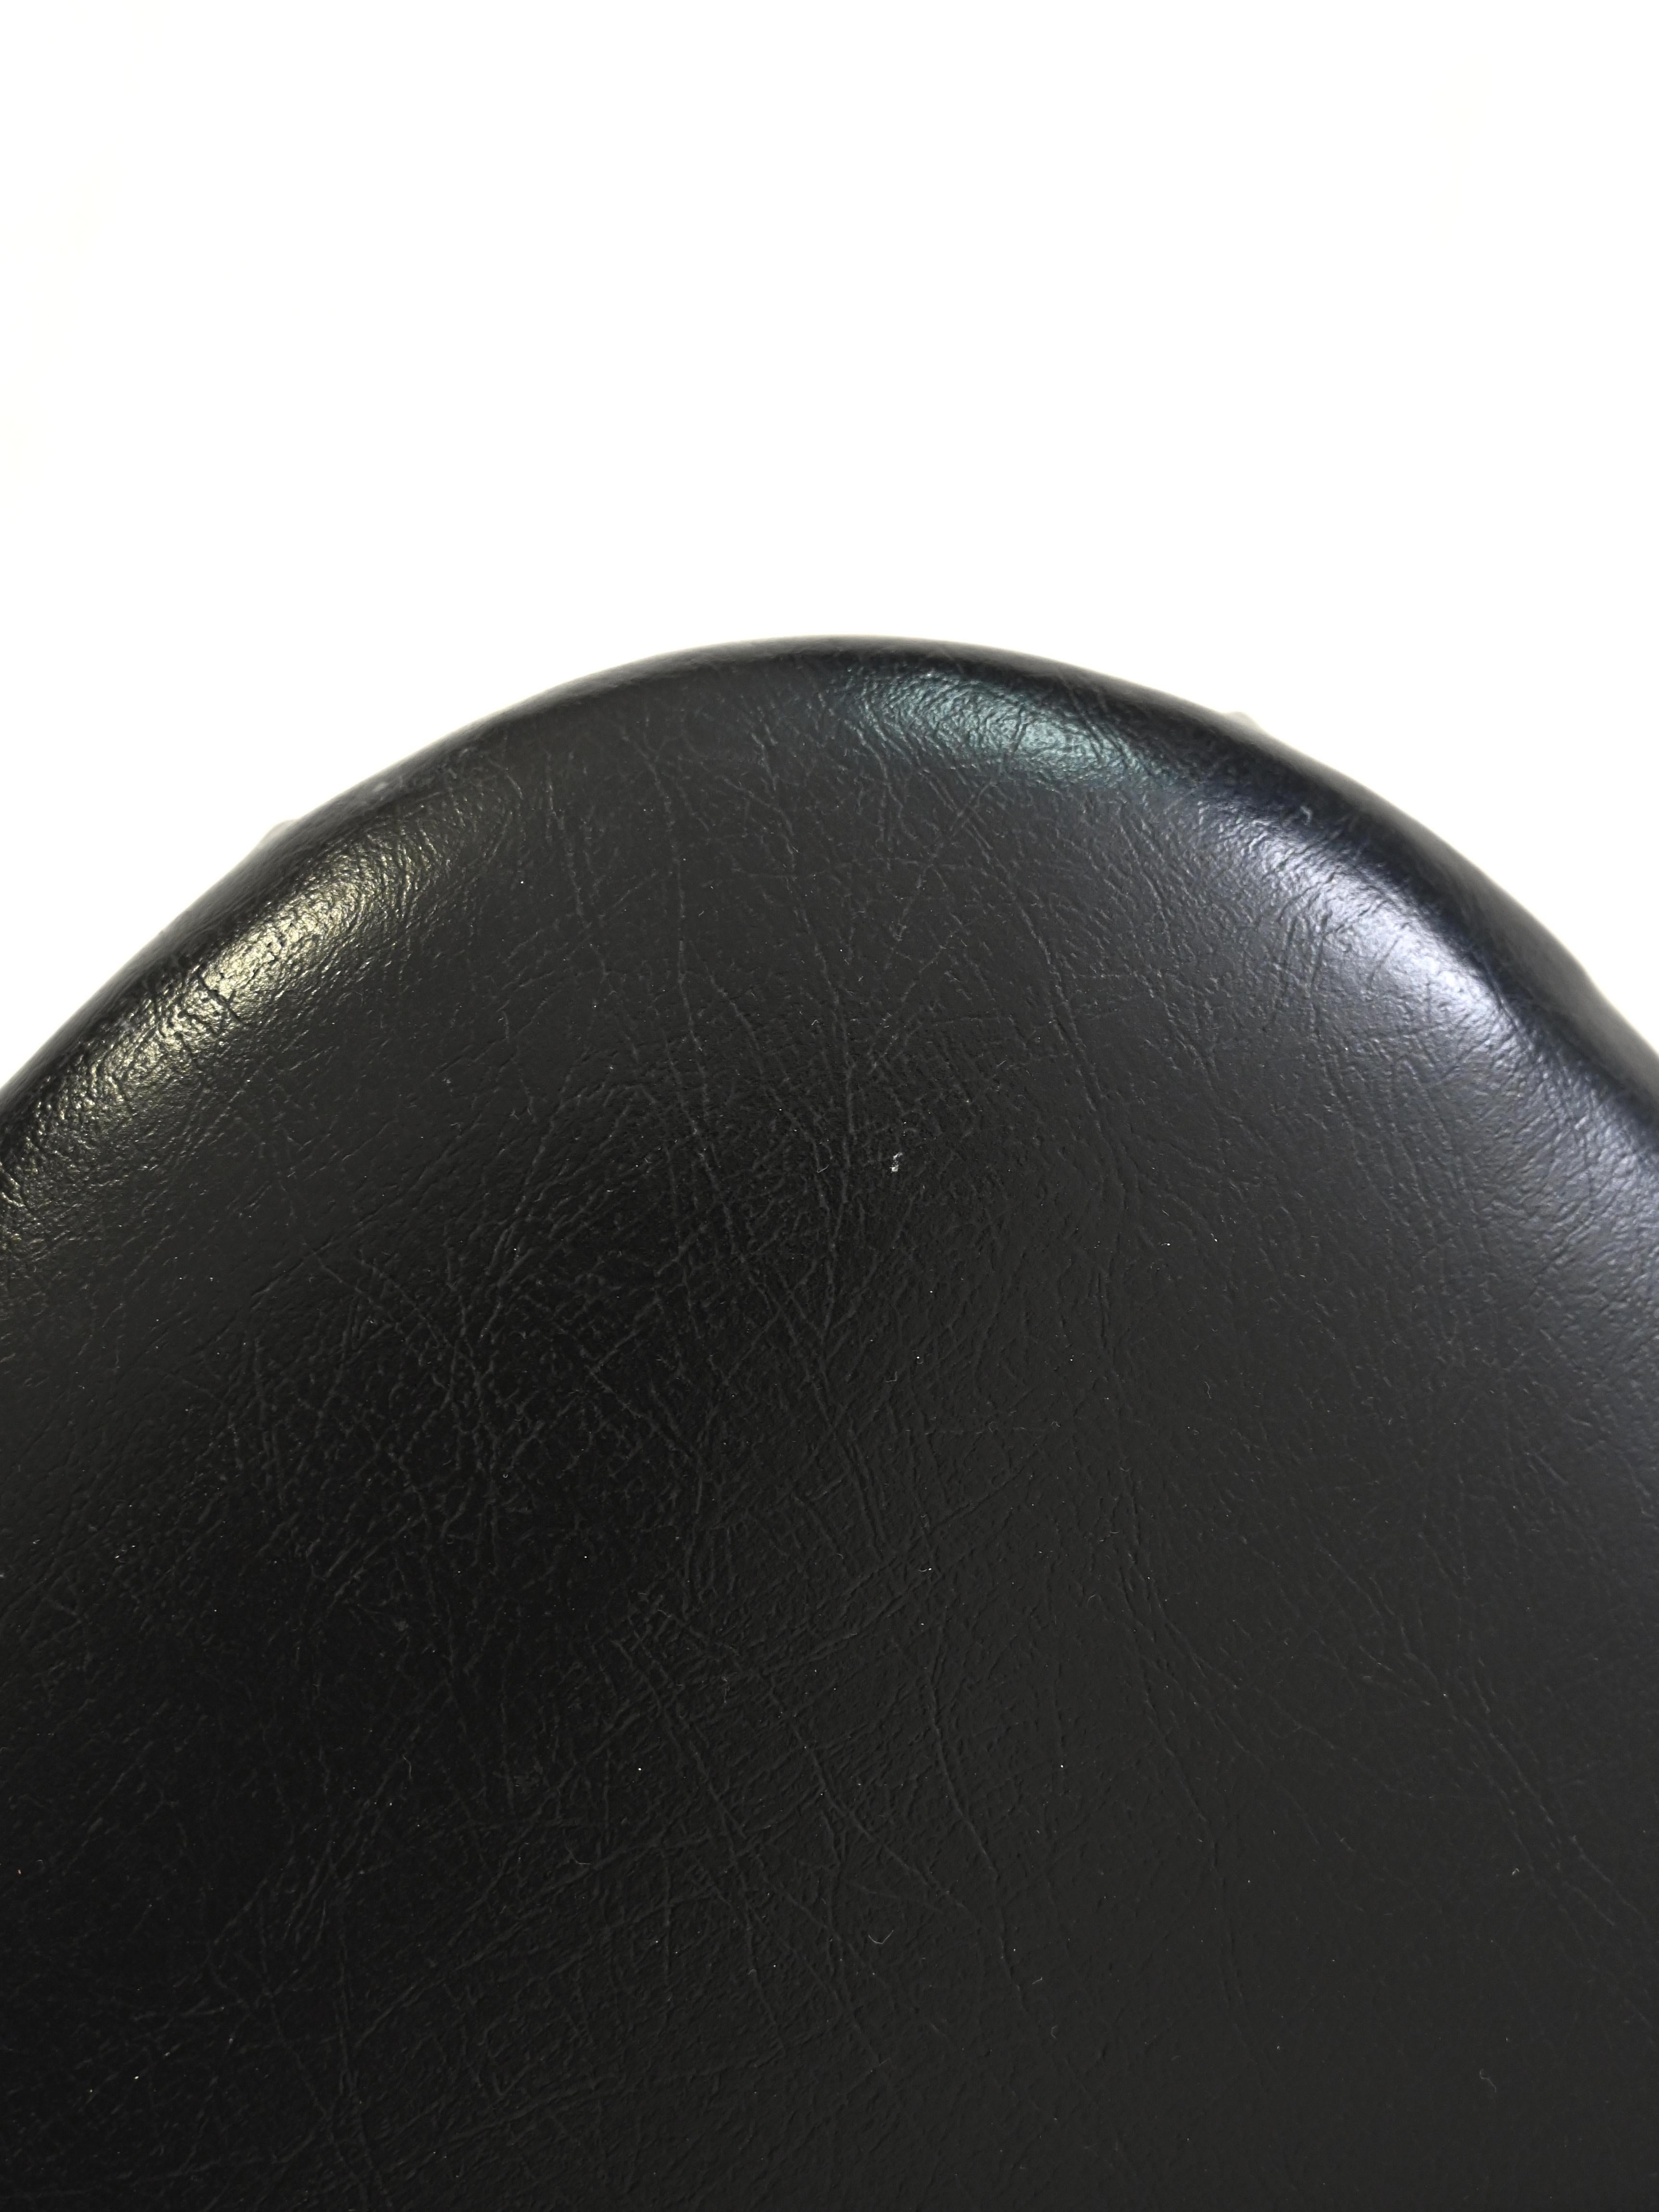 Mid-20th Century Scandinavian Vintage Black Leather Chair For Sale